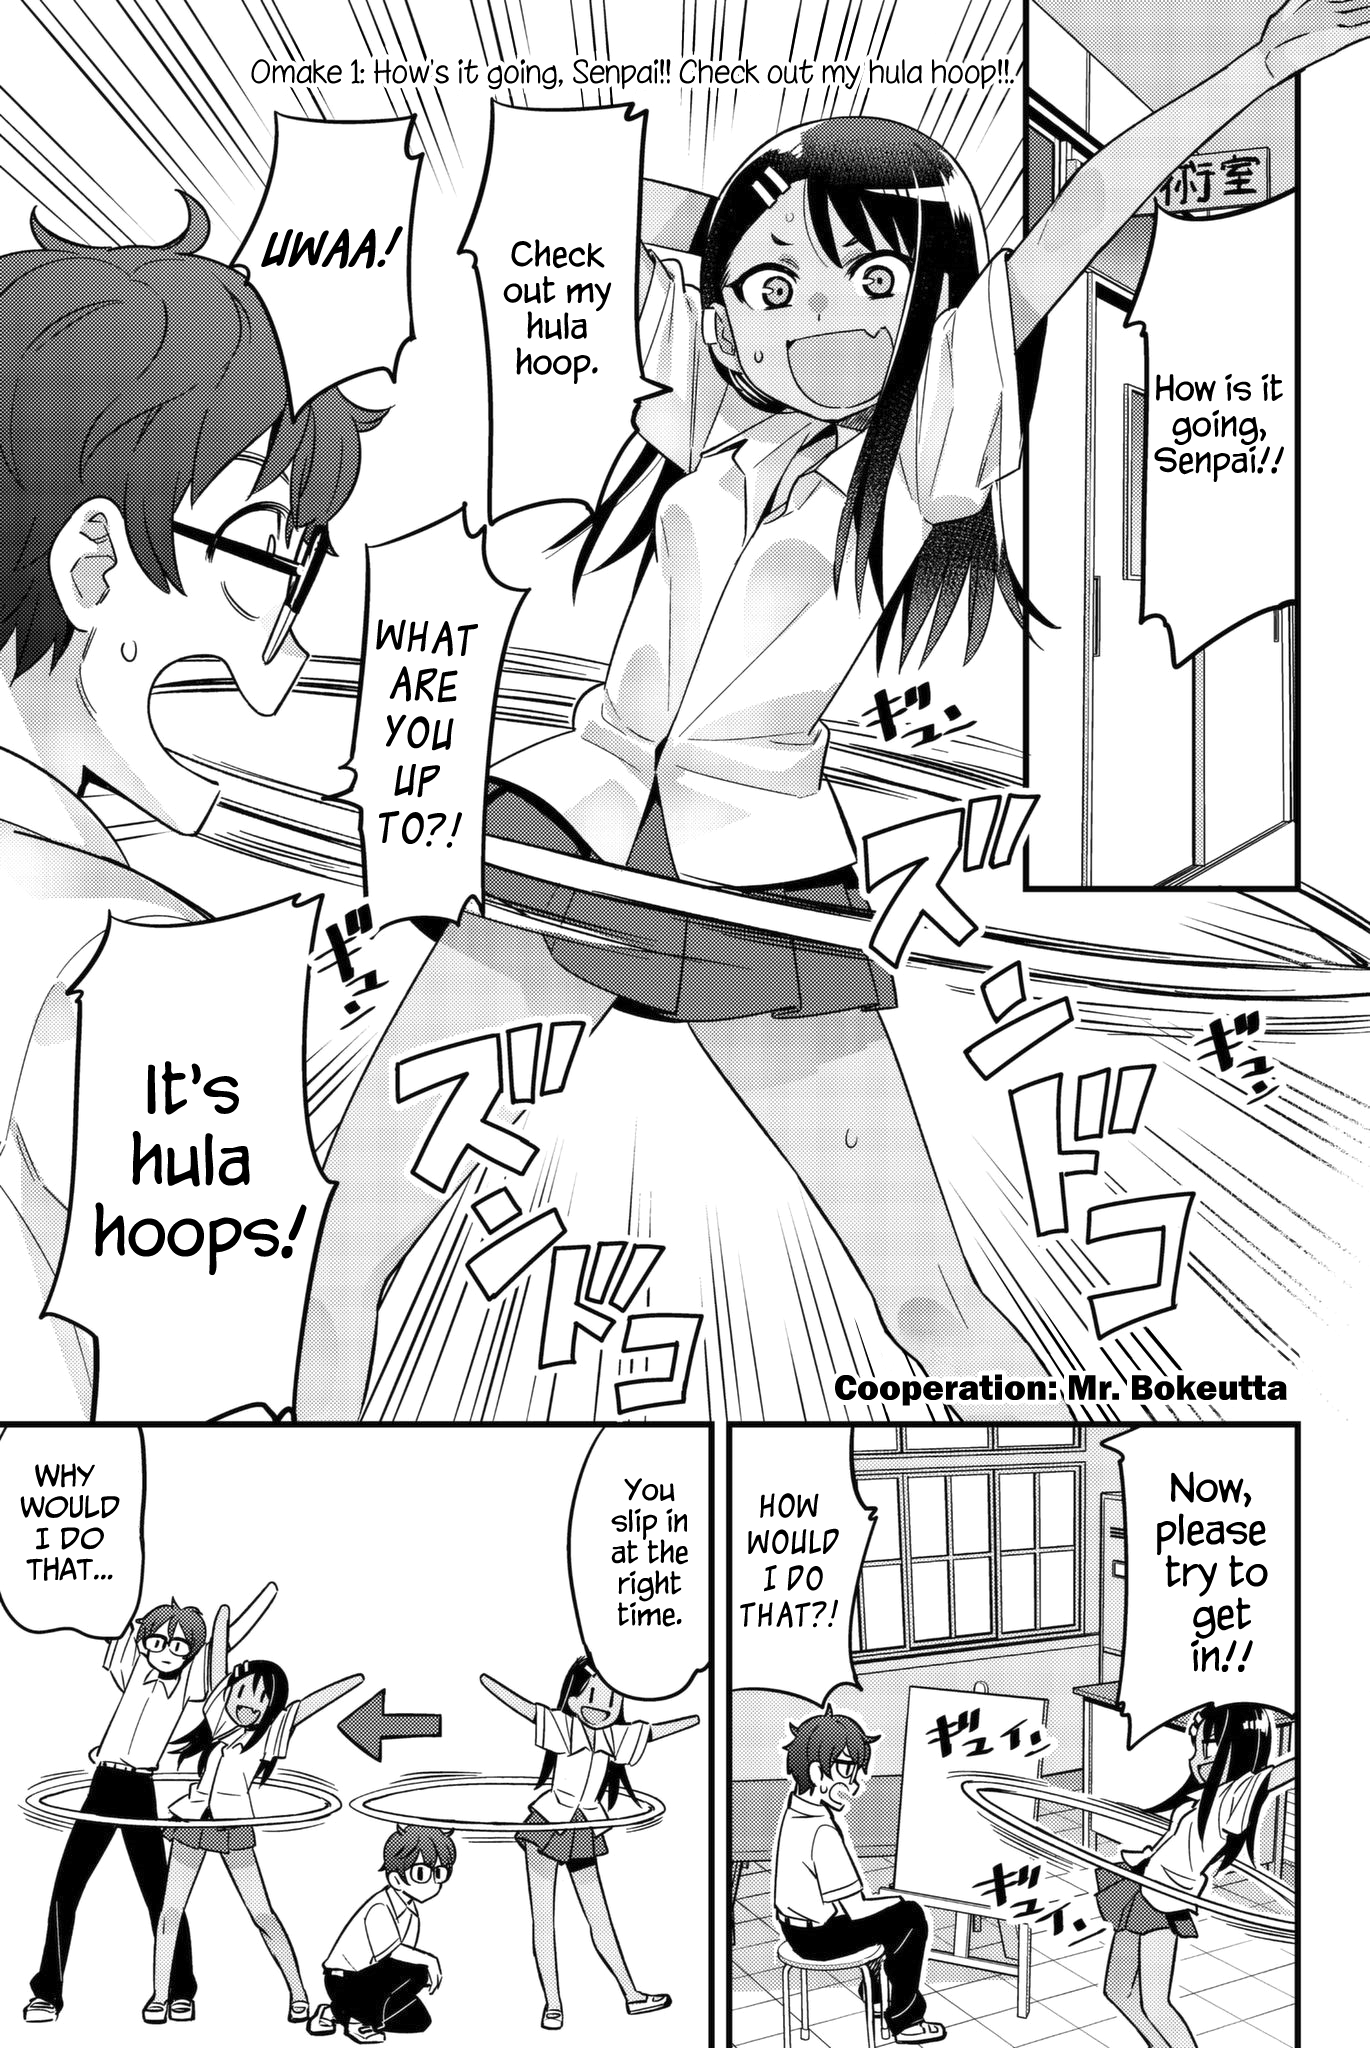 Ijiranaide, Nagatoro-San Vol.3 Chapter 23.1: Omake 1: How's It Going, Senpai!! Check Out My Hula Hoop!! - Picture 1